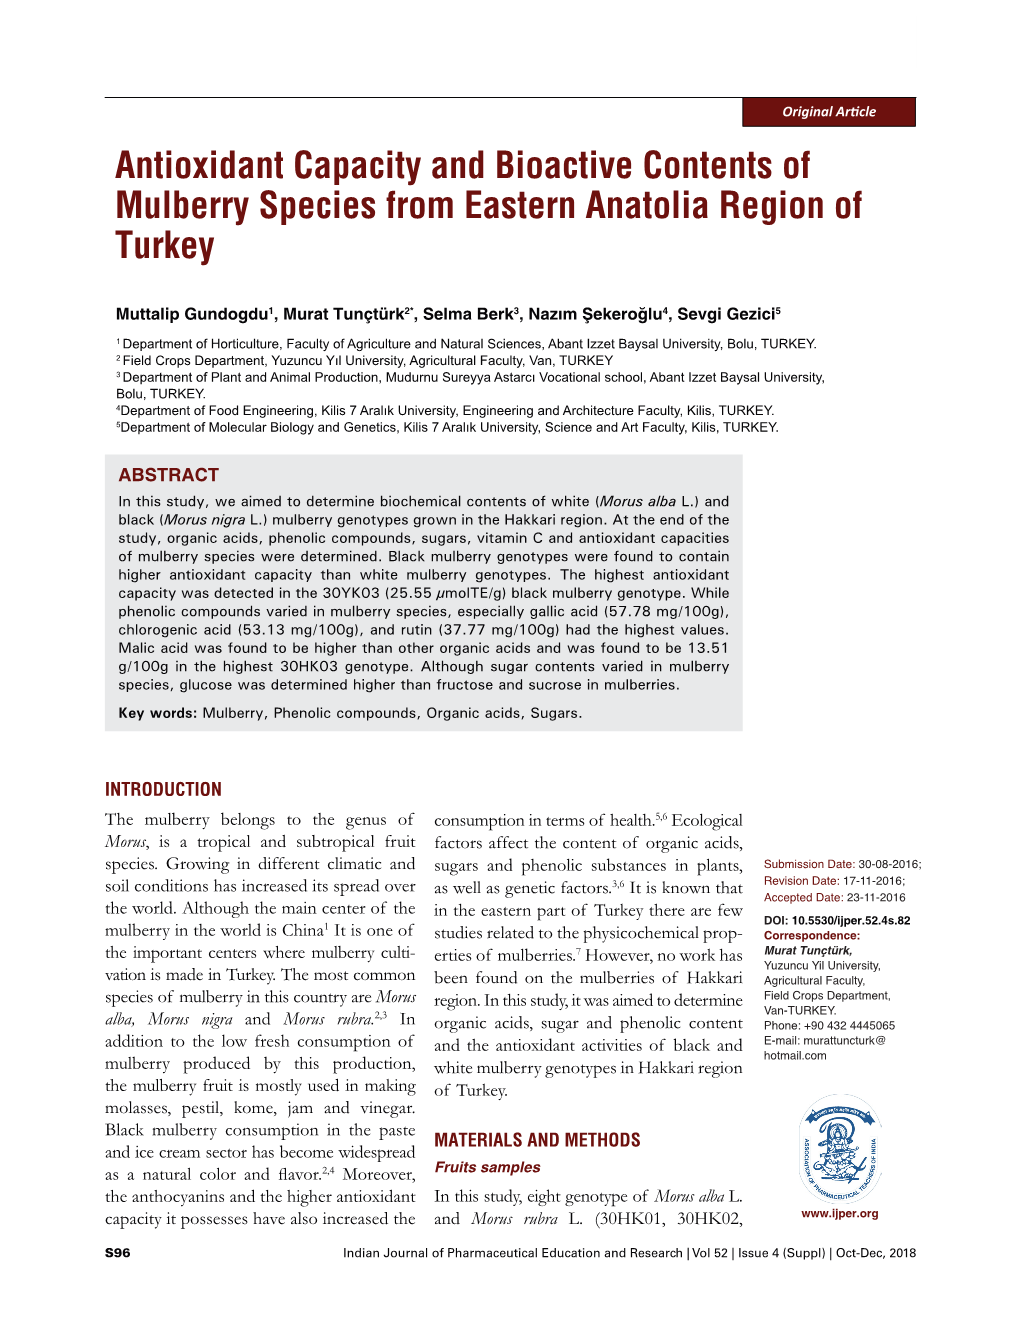 Antioxidant Capacity and Bioactive Contents of Mulberry Species from Eastern Anatolia Region of Turkey